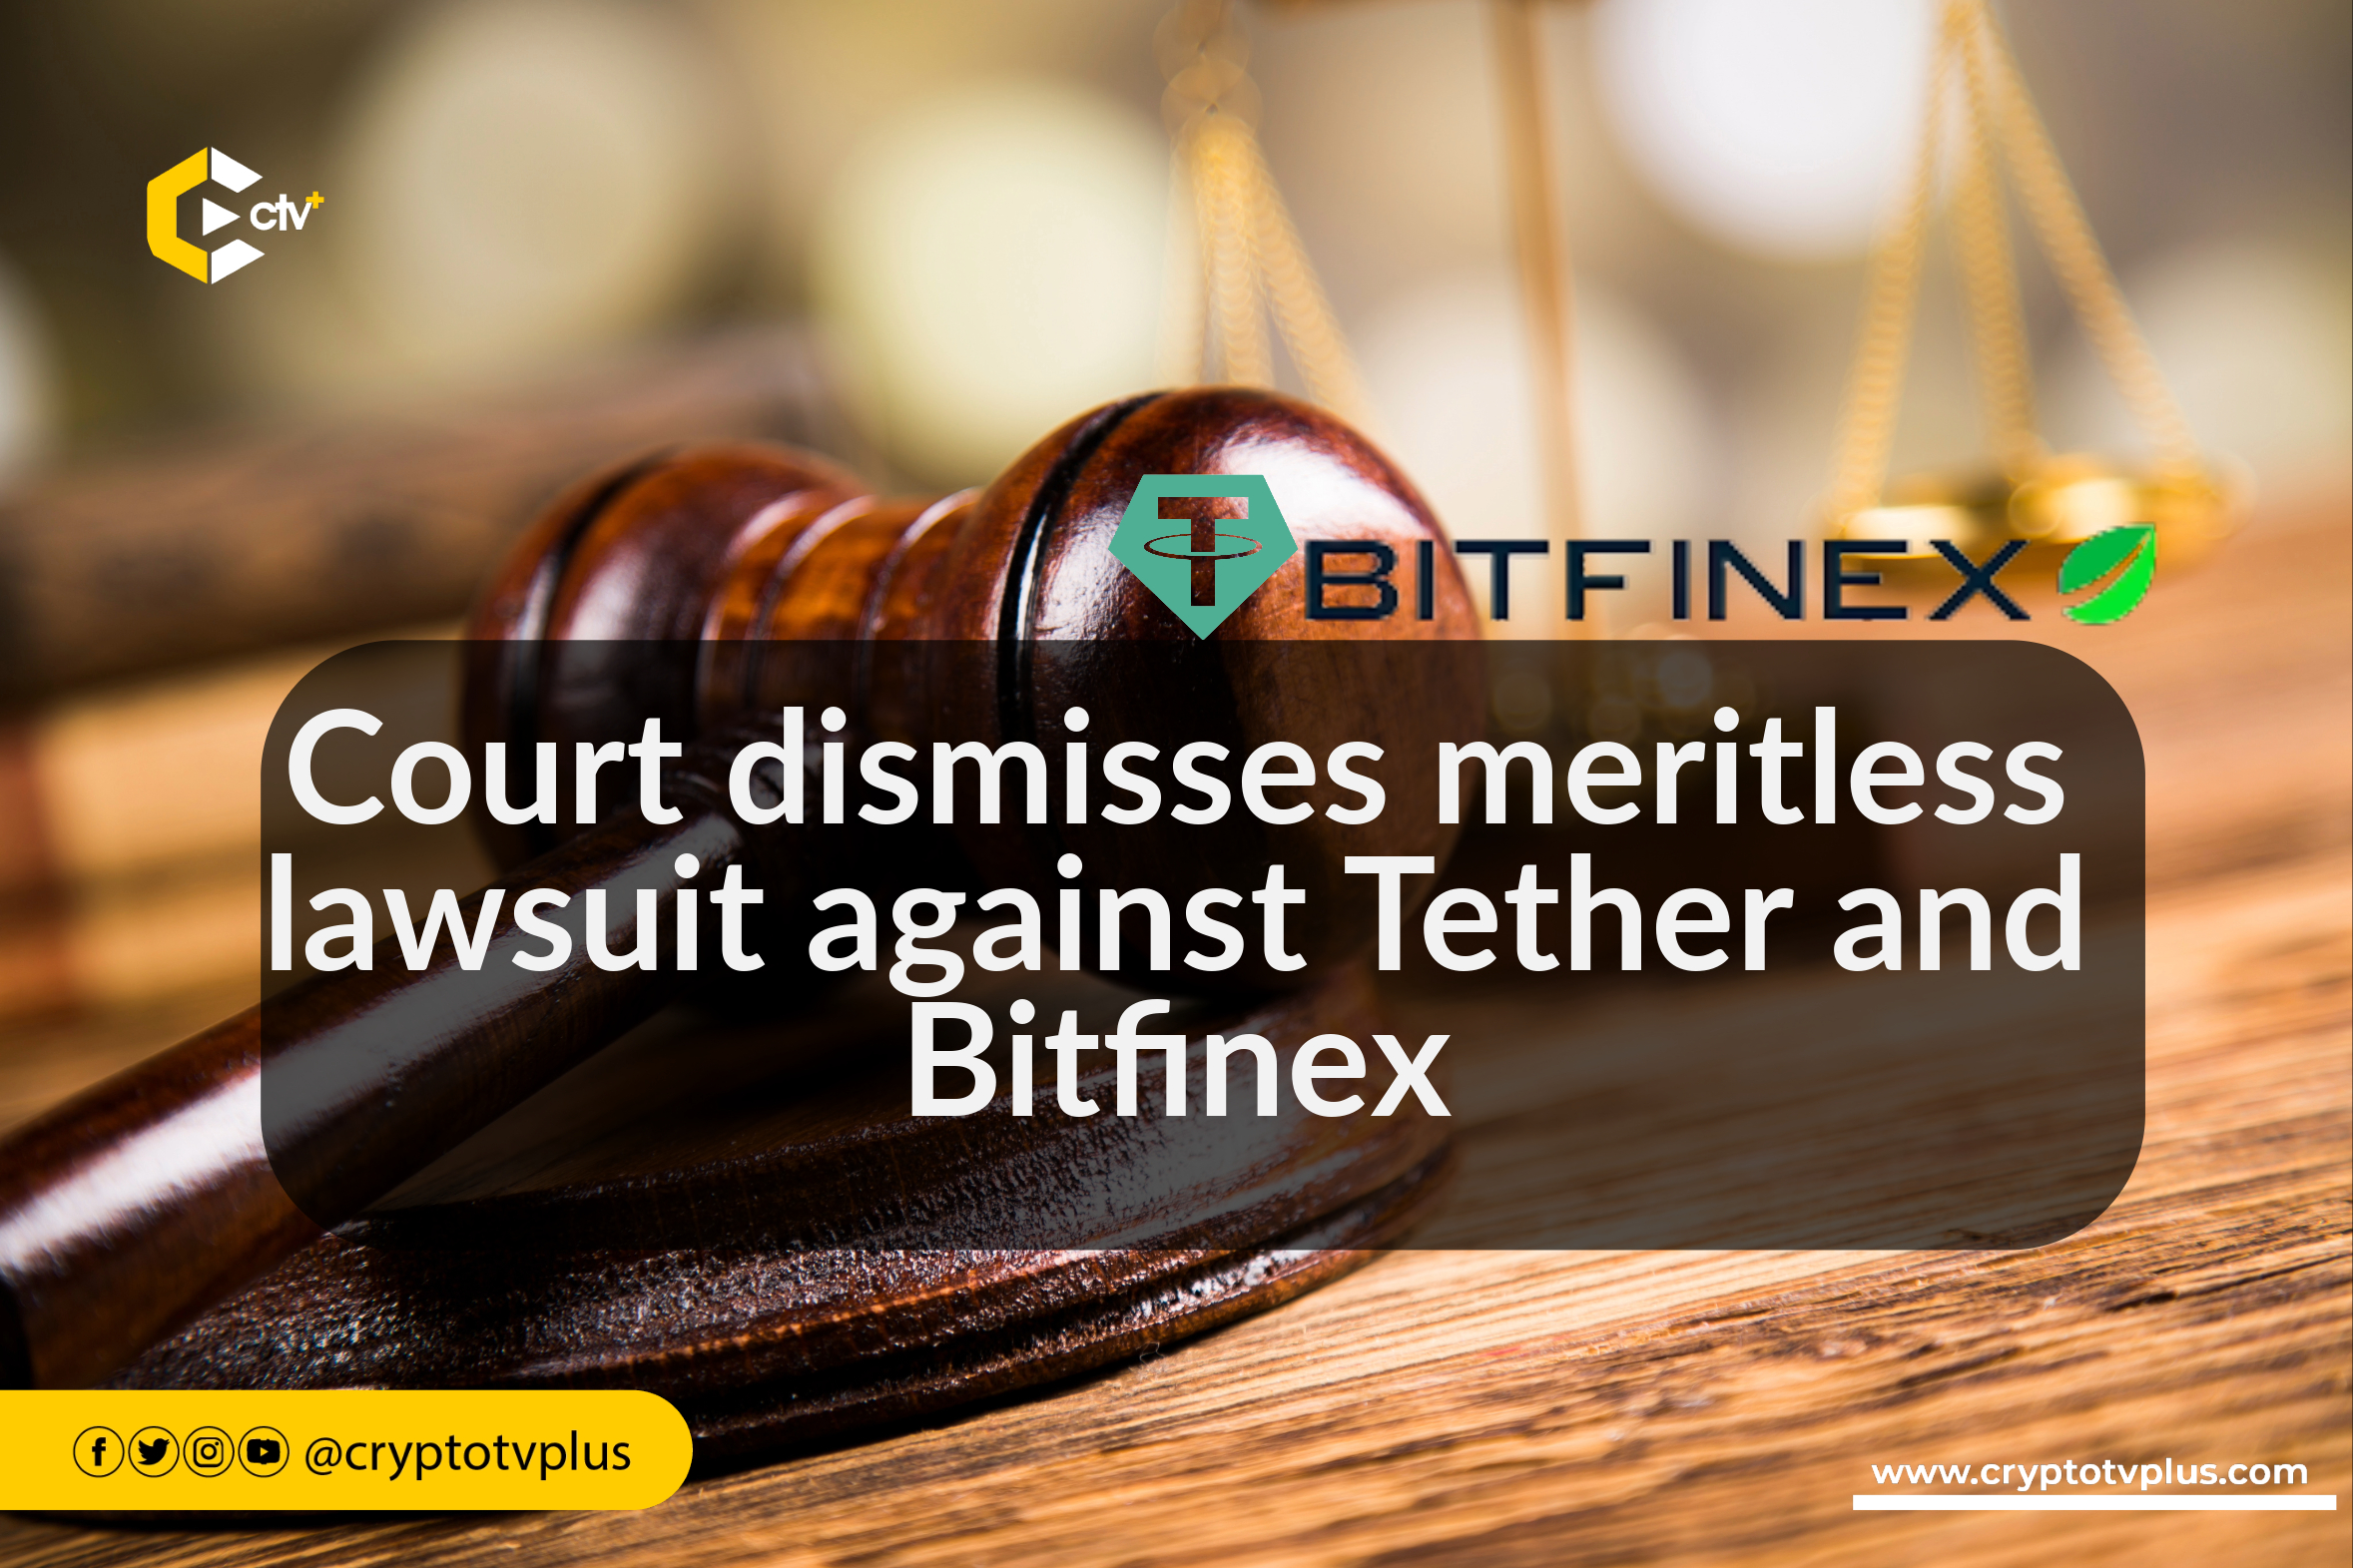 Court dismisses lawsuit against Tether and Bitfinex. Plaintiffs choose not to appeal. Tether and Bitfinex cleared of all allegations. lawsuit dismissal, Tether, Bitfinex, court ruling